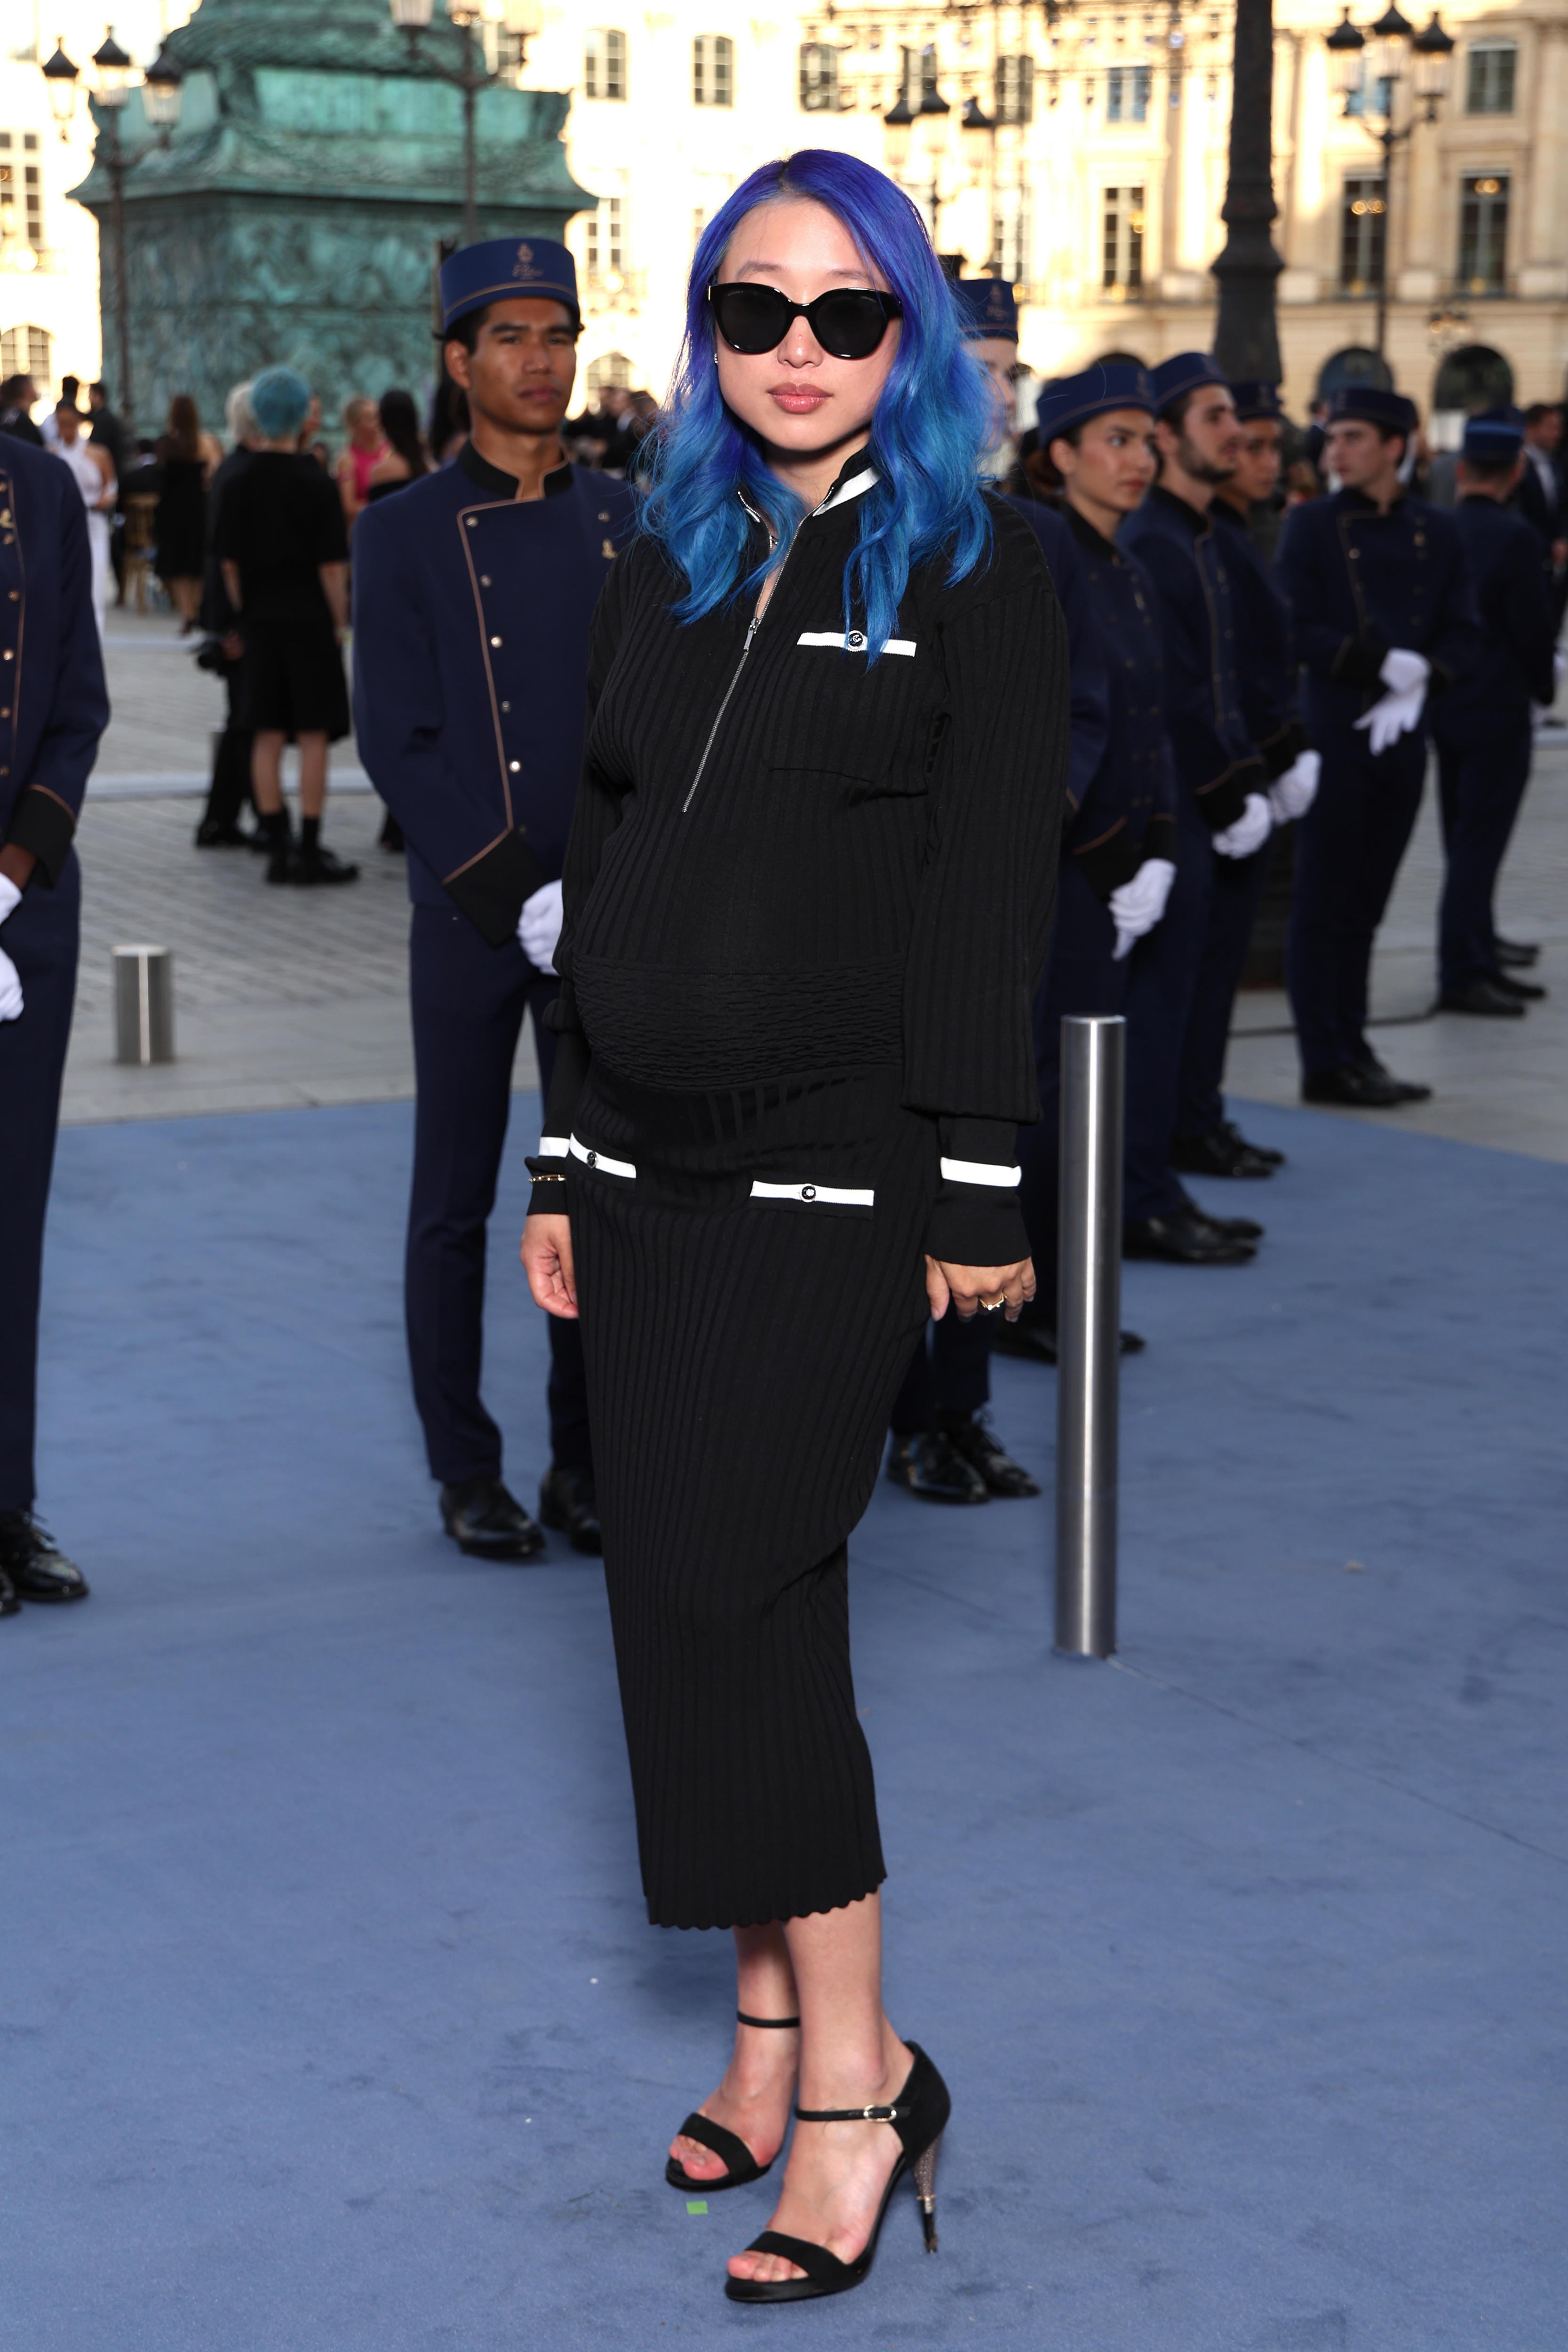 Margaret Zhang, who has blue hair, wears sunglasses and a black outfit